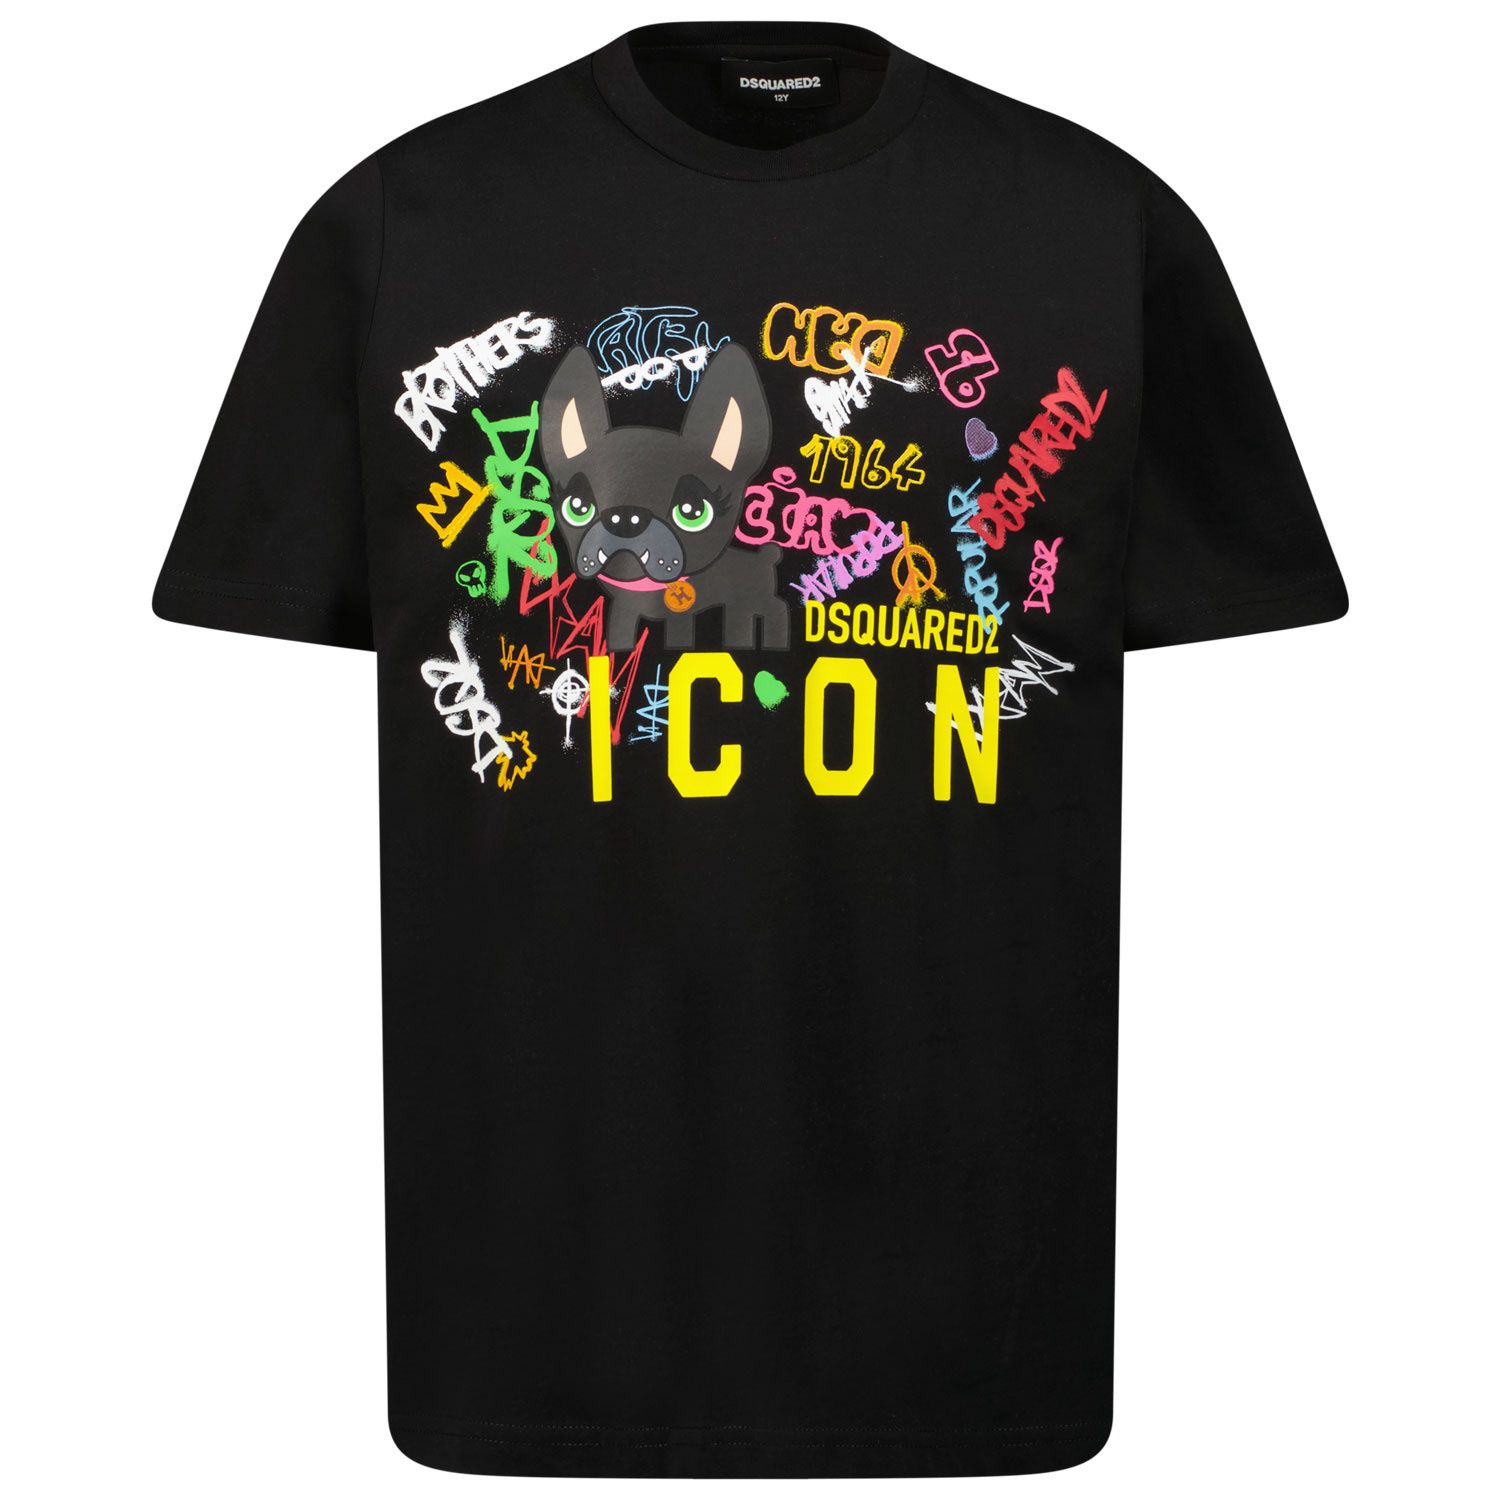 Picture of Dsquared2 DQ0953 kids t-shirt black